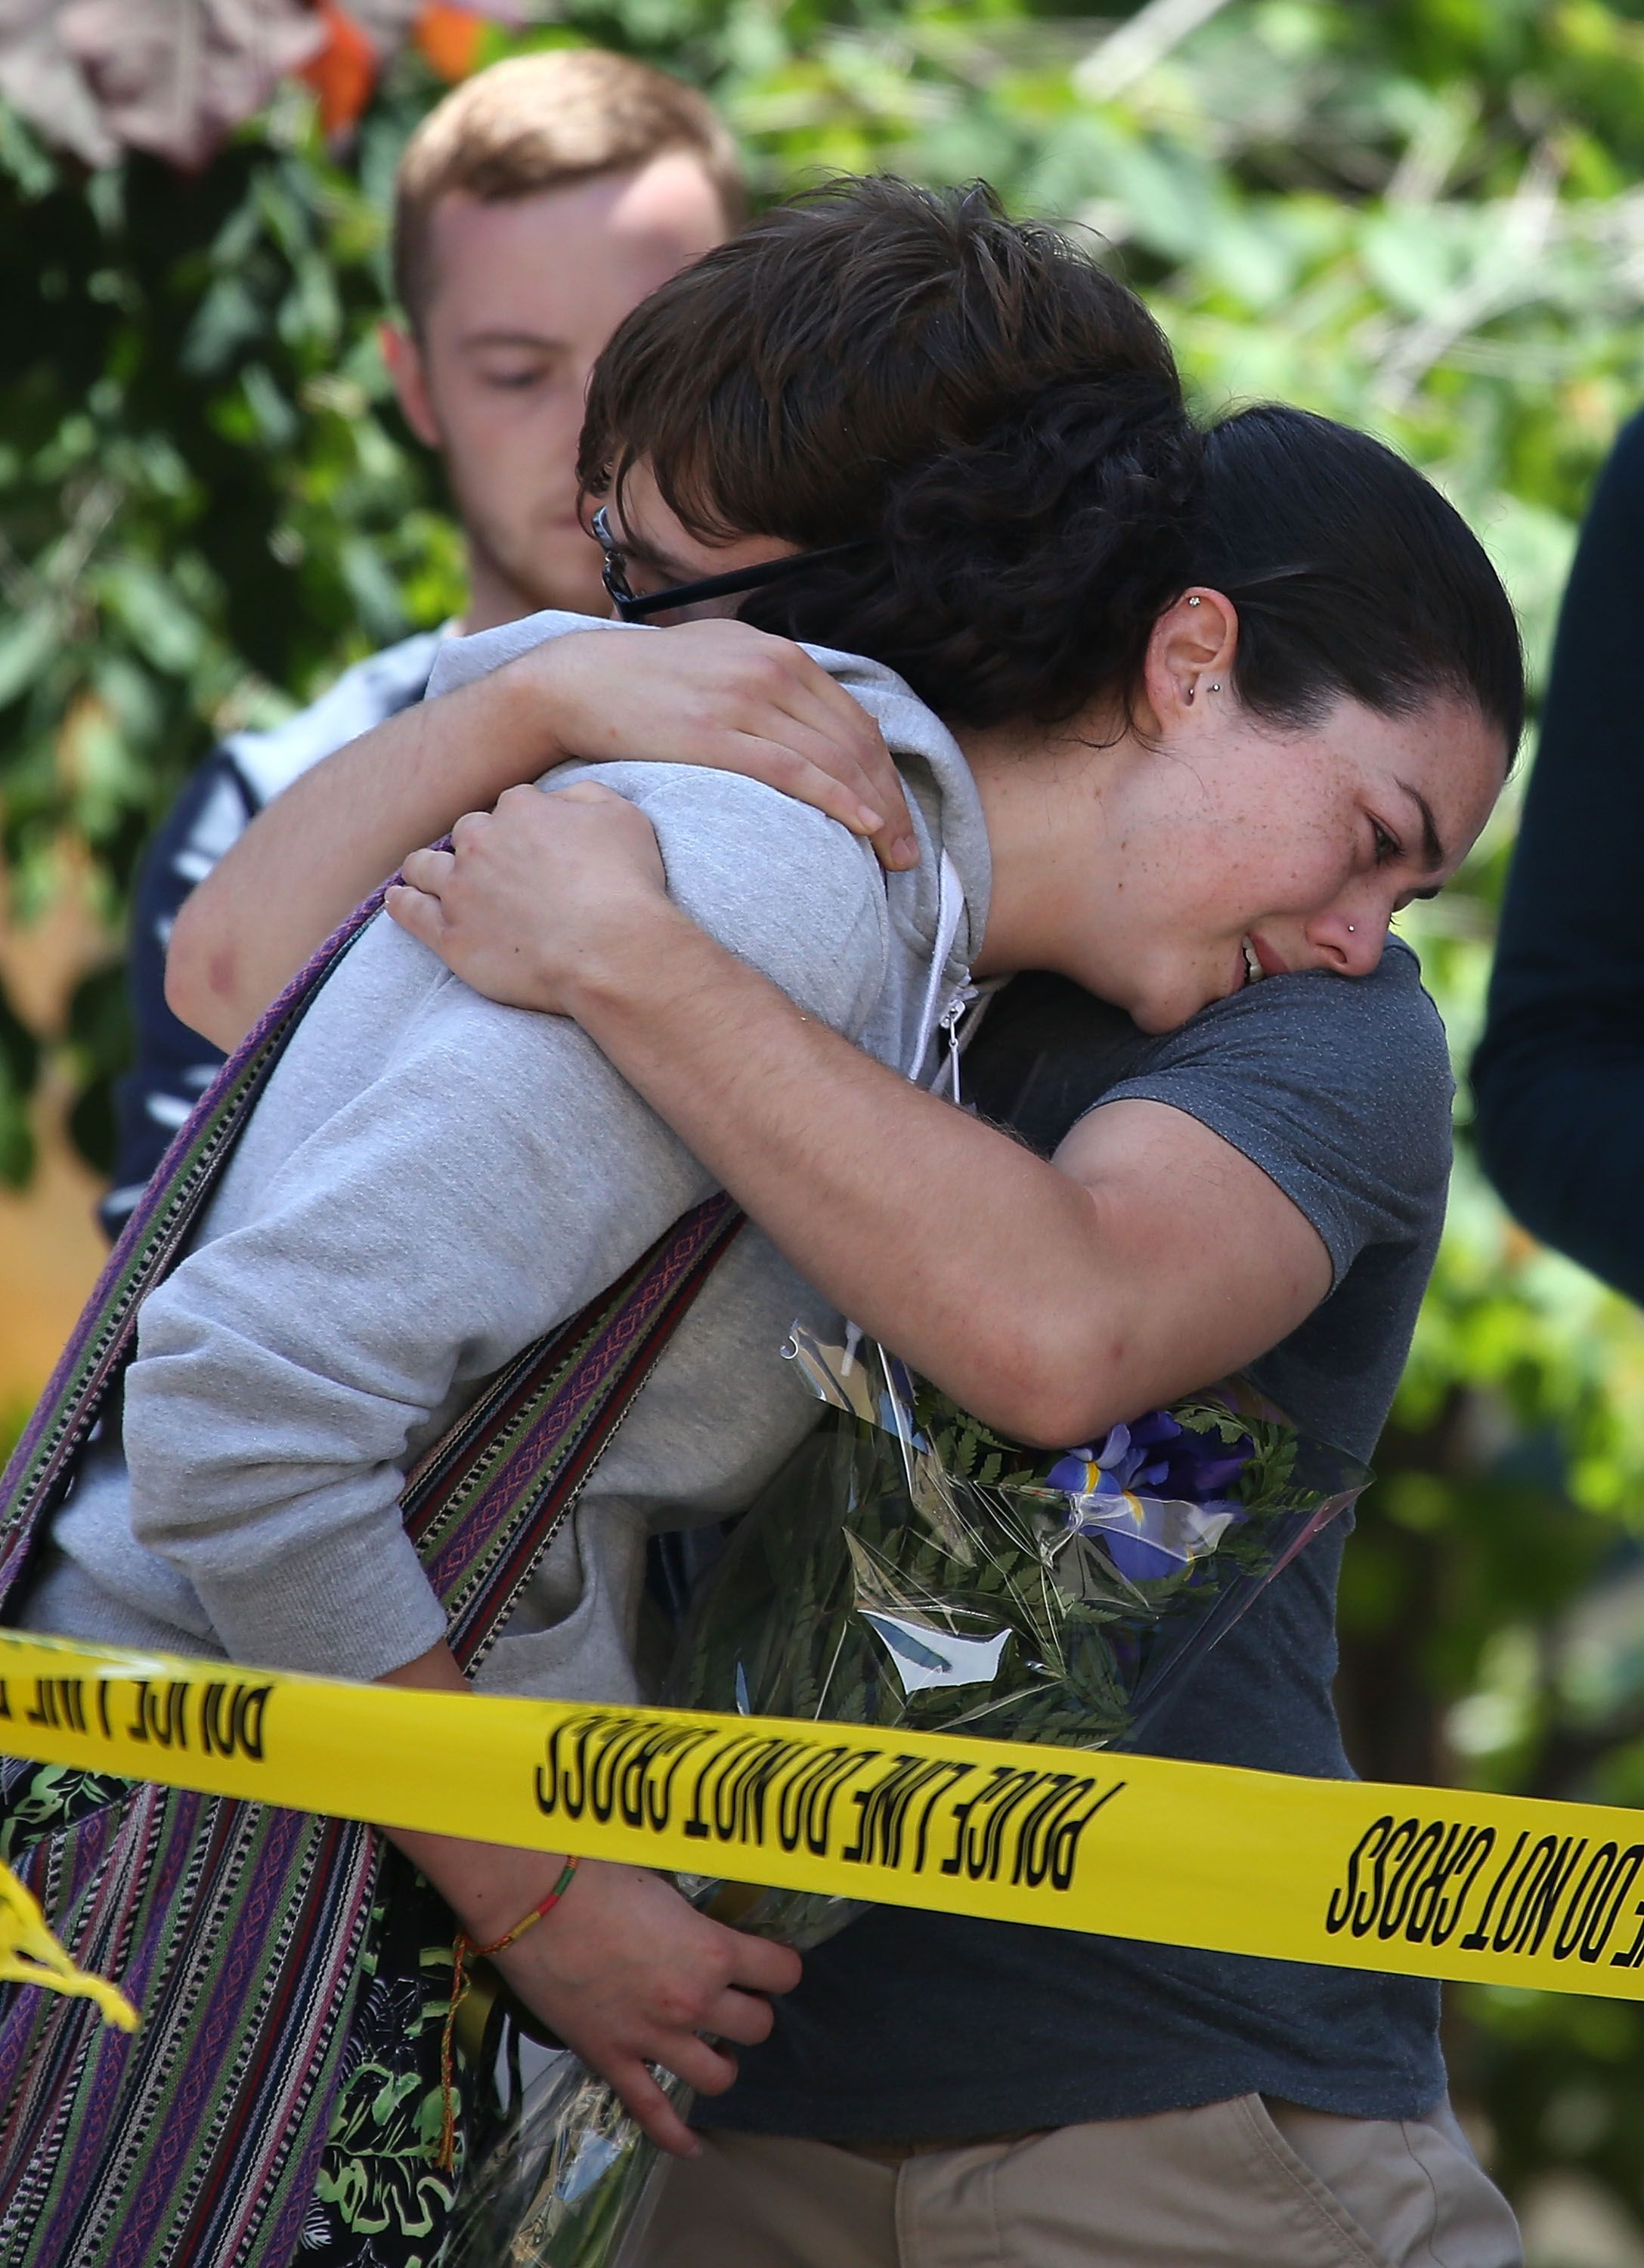 BERKELEY, CA - JUNE 16: A woman cries as she leaves flowers at the scene of a balcony collapse at an apartment building near UC Berkeley on June 16, 2015 in Berkeley, California. 6 people were killed and 7 were seriously injured when a balcony collapsed at an apartment building near the University of California at Berkeley campus. (Photo by Justin Sullivan/Getty Images)